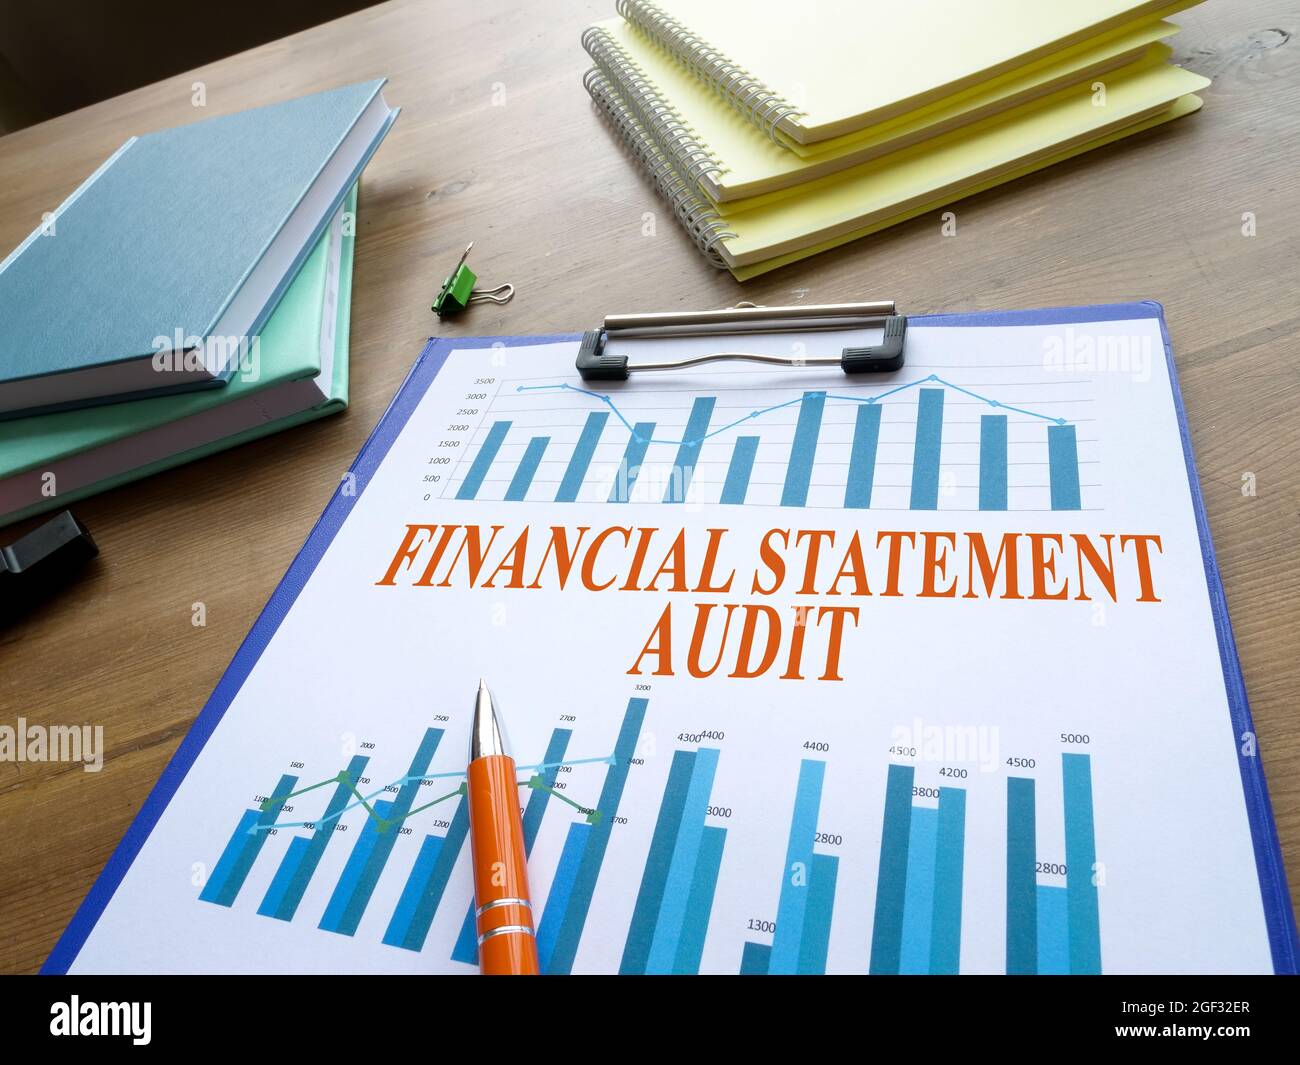 Financial statement audit report with business graph. Stock Photo